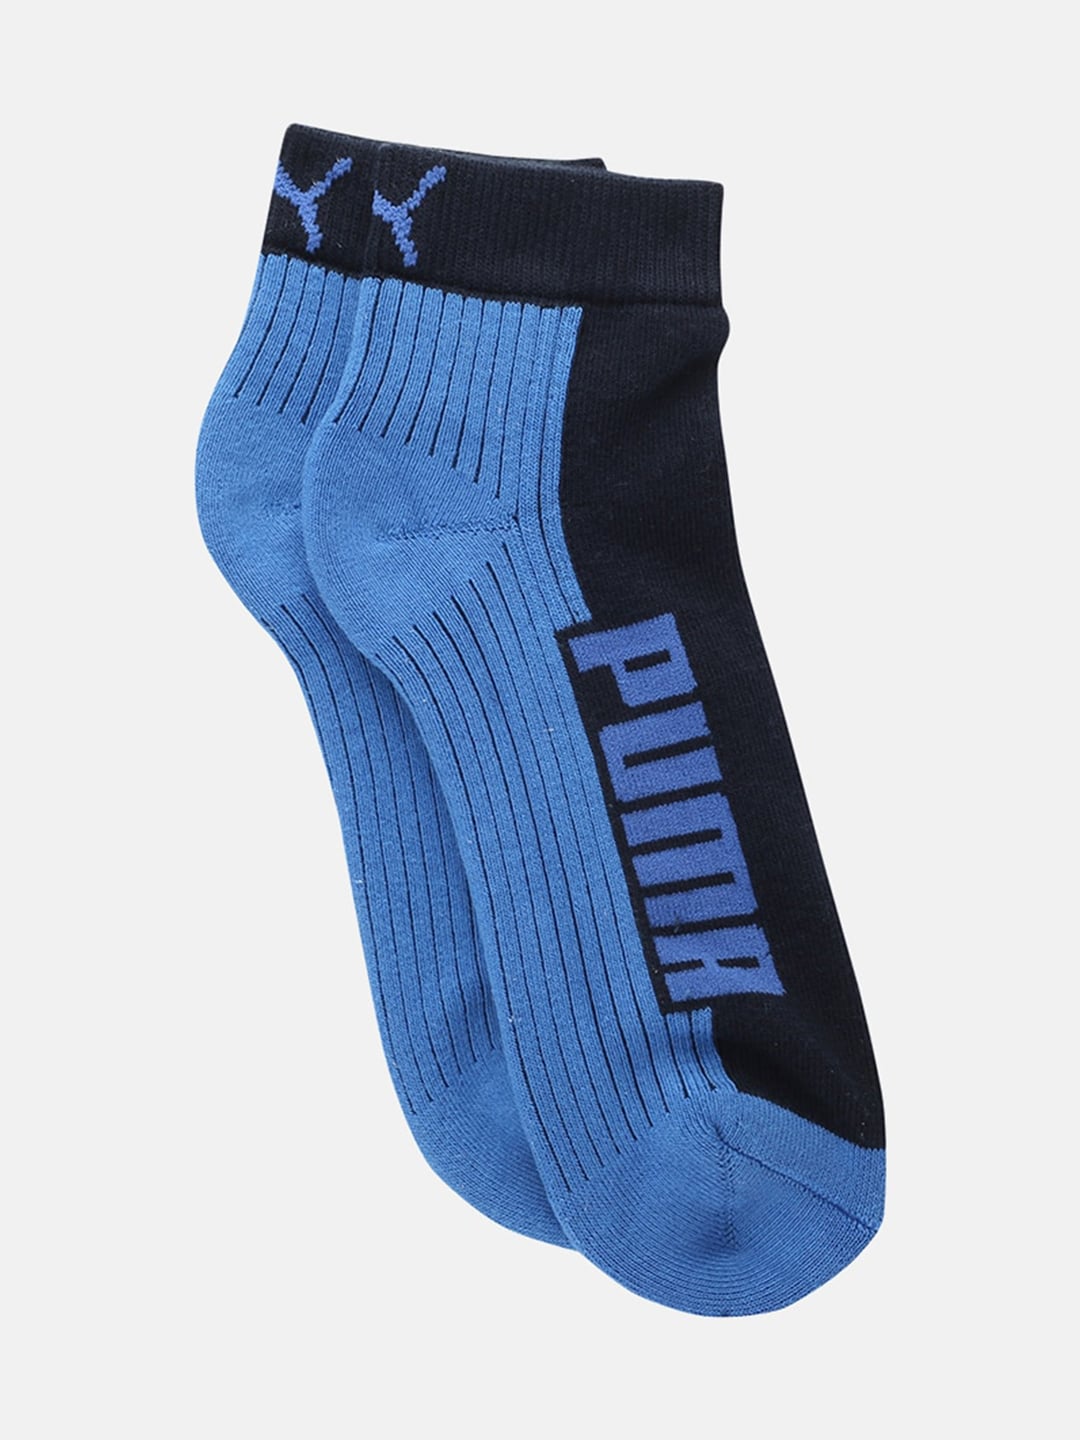 Puma Adults Blue & Grey Pack of 2 Colourblocked Above Ankle Socks Price in India